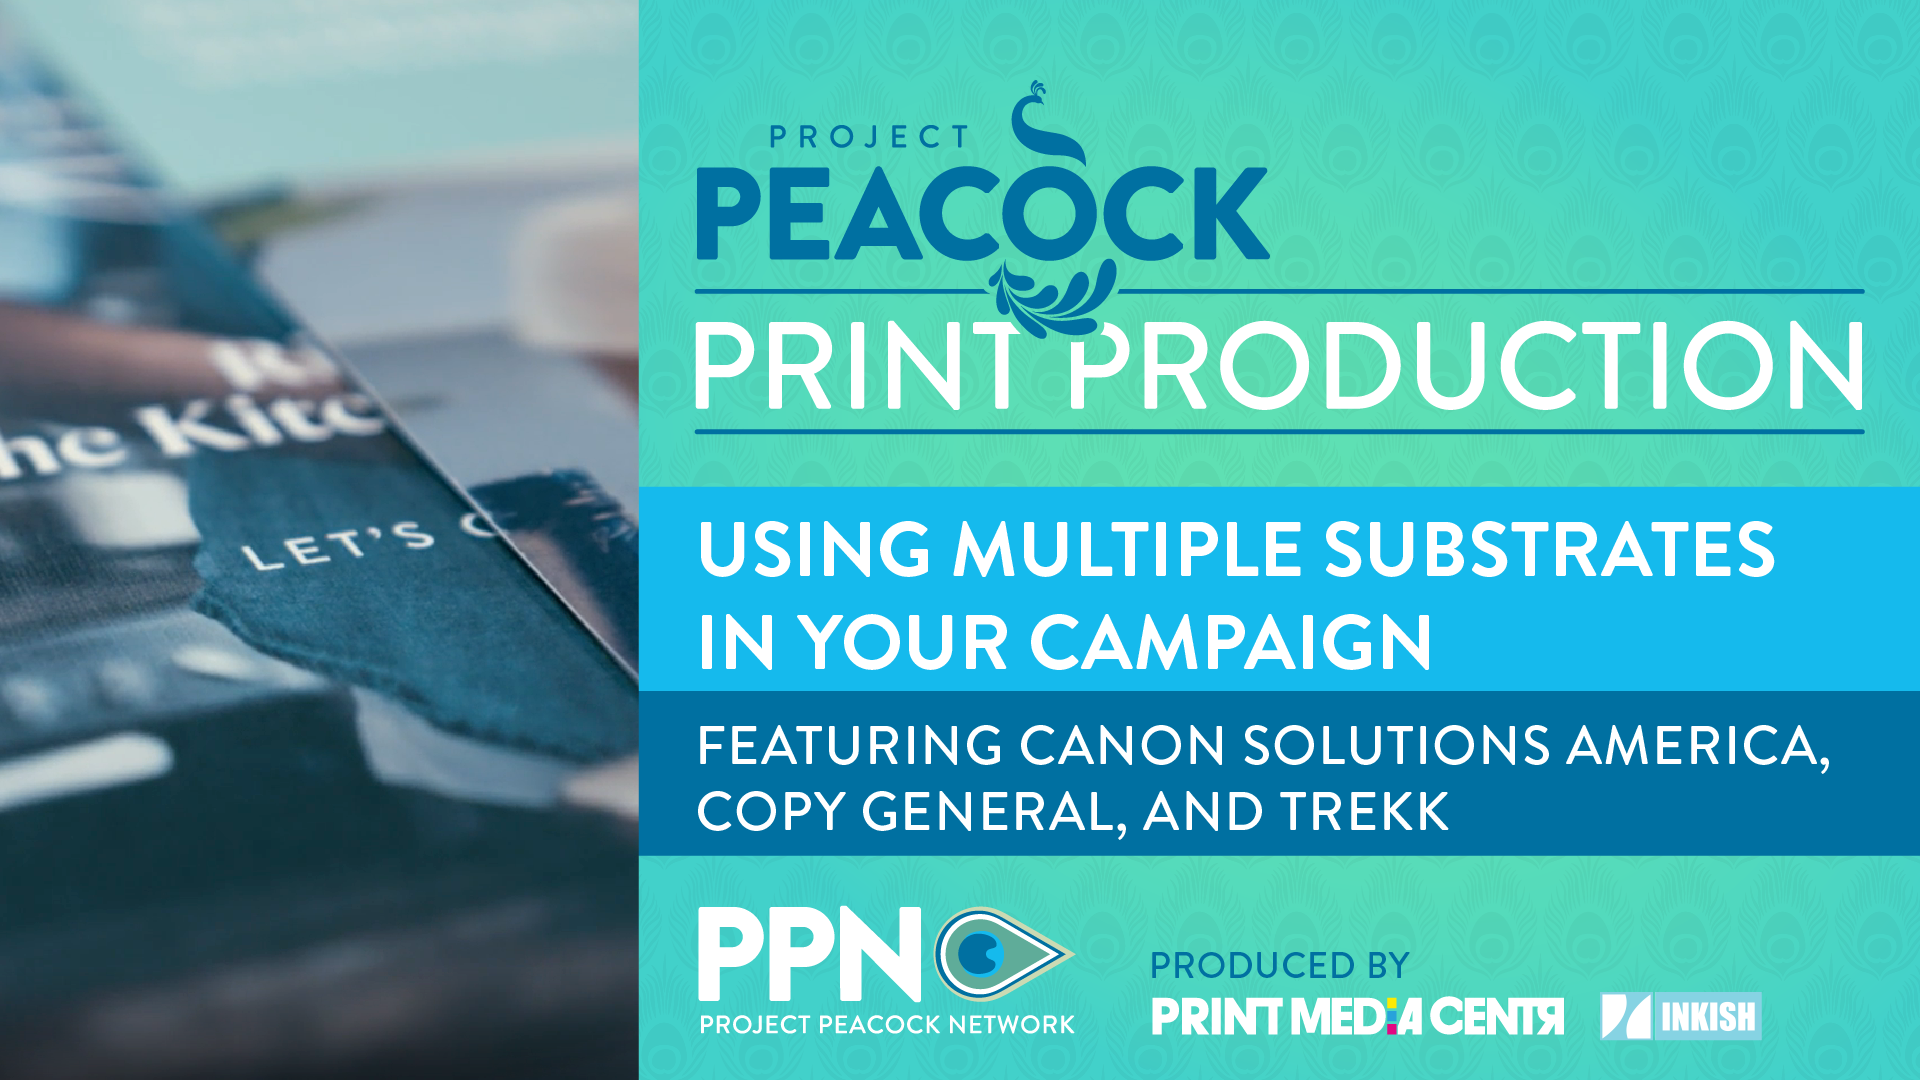 Video Thumbnail for Project Peacock Print Production video title Using Multiple Substrates in Your Campaign to the right. A photo of the corner of a brochure with a few pages is on the left of the thumbnail